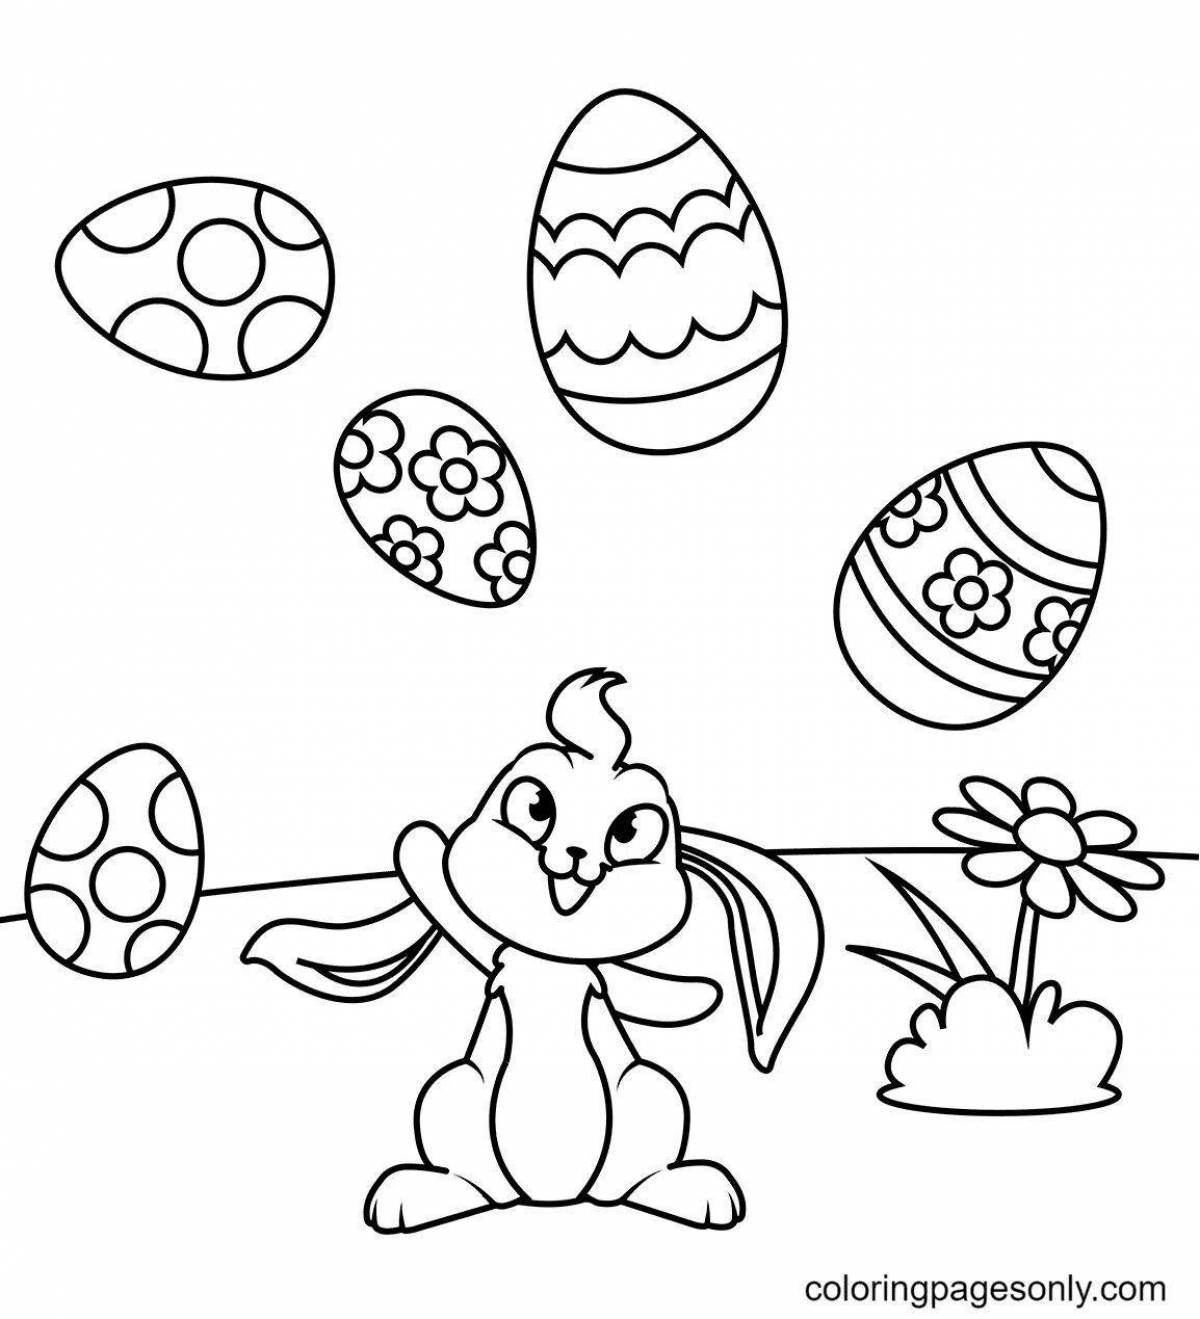 Creative easter coloring book for kids